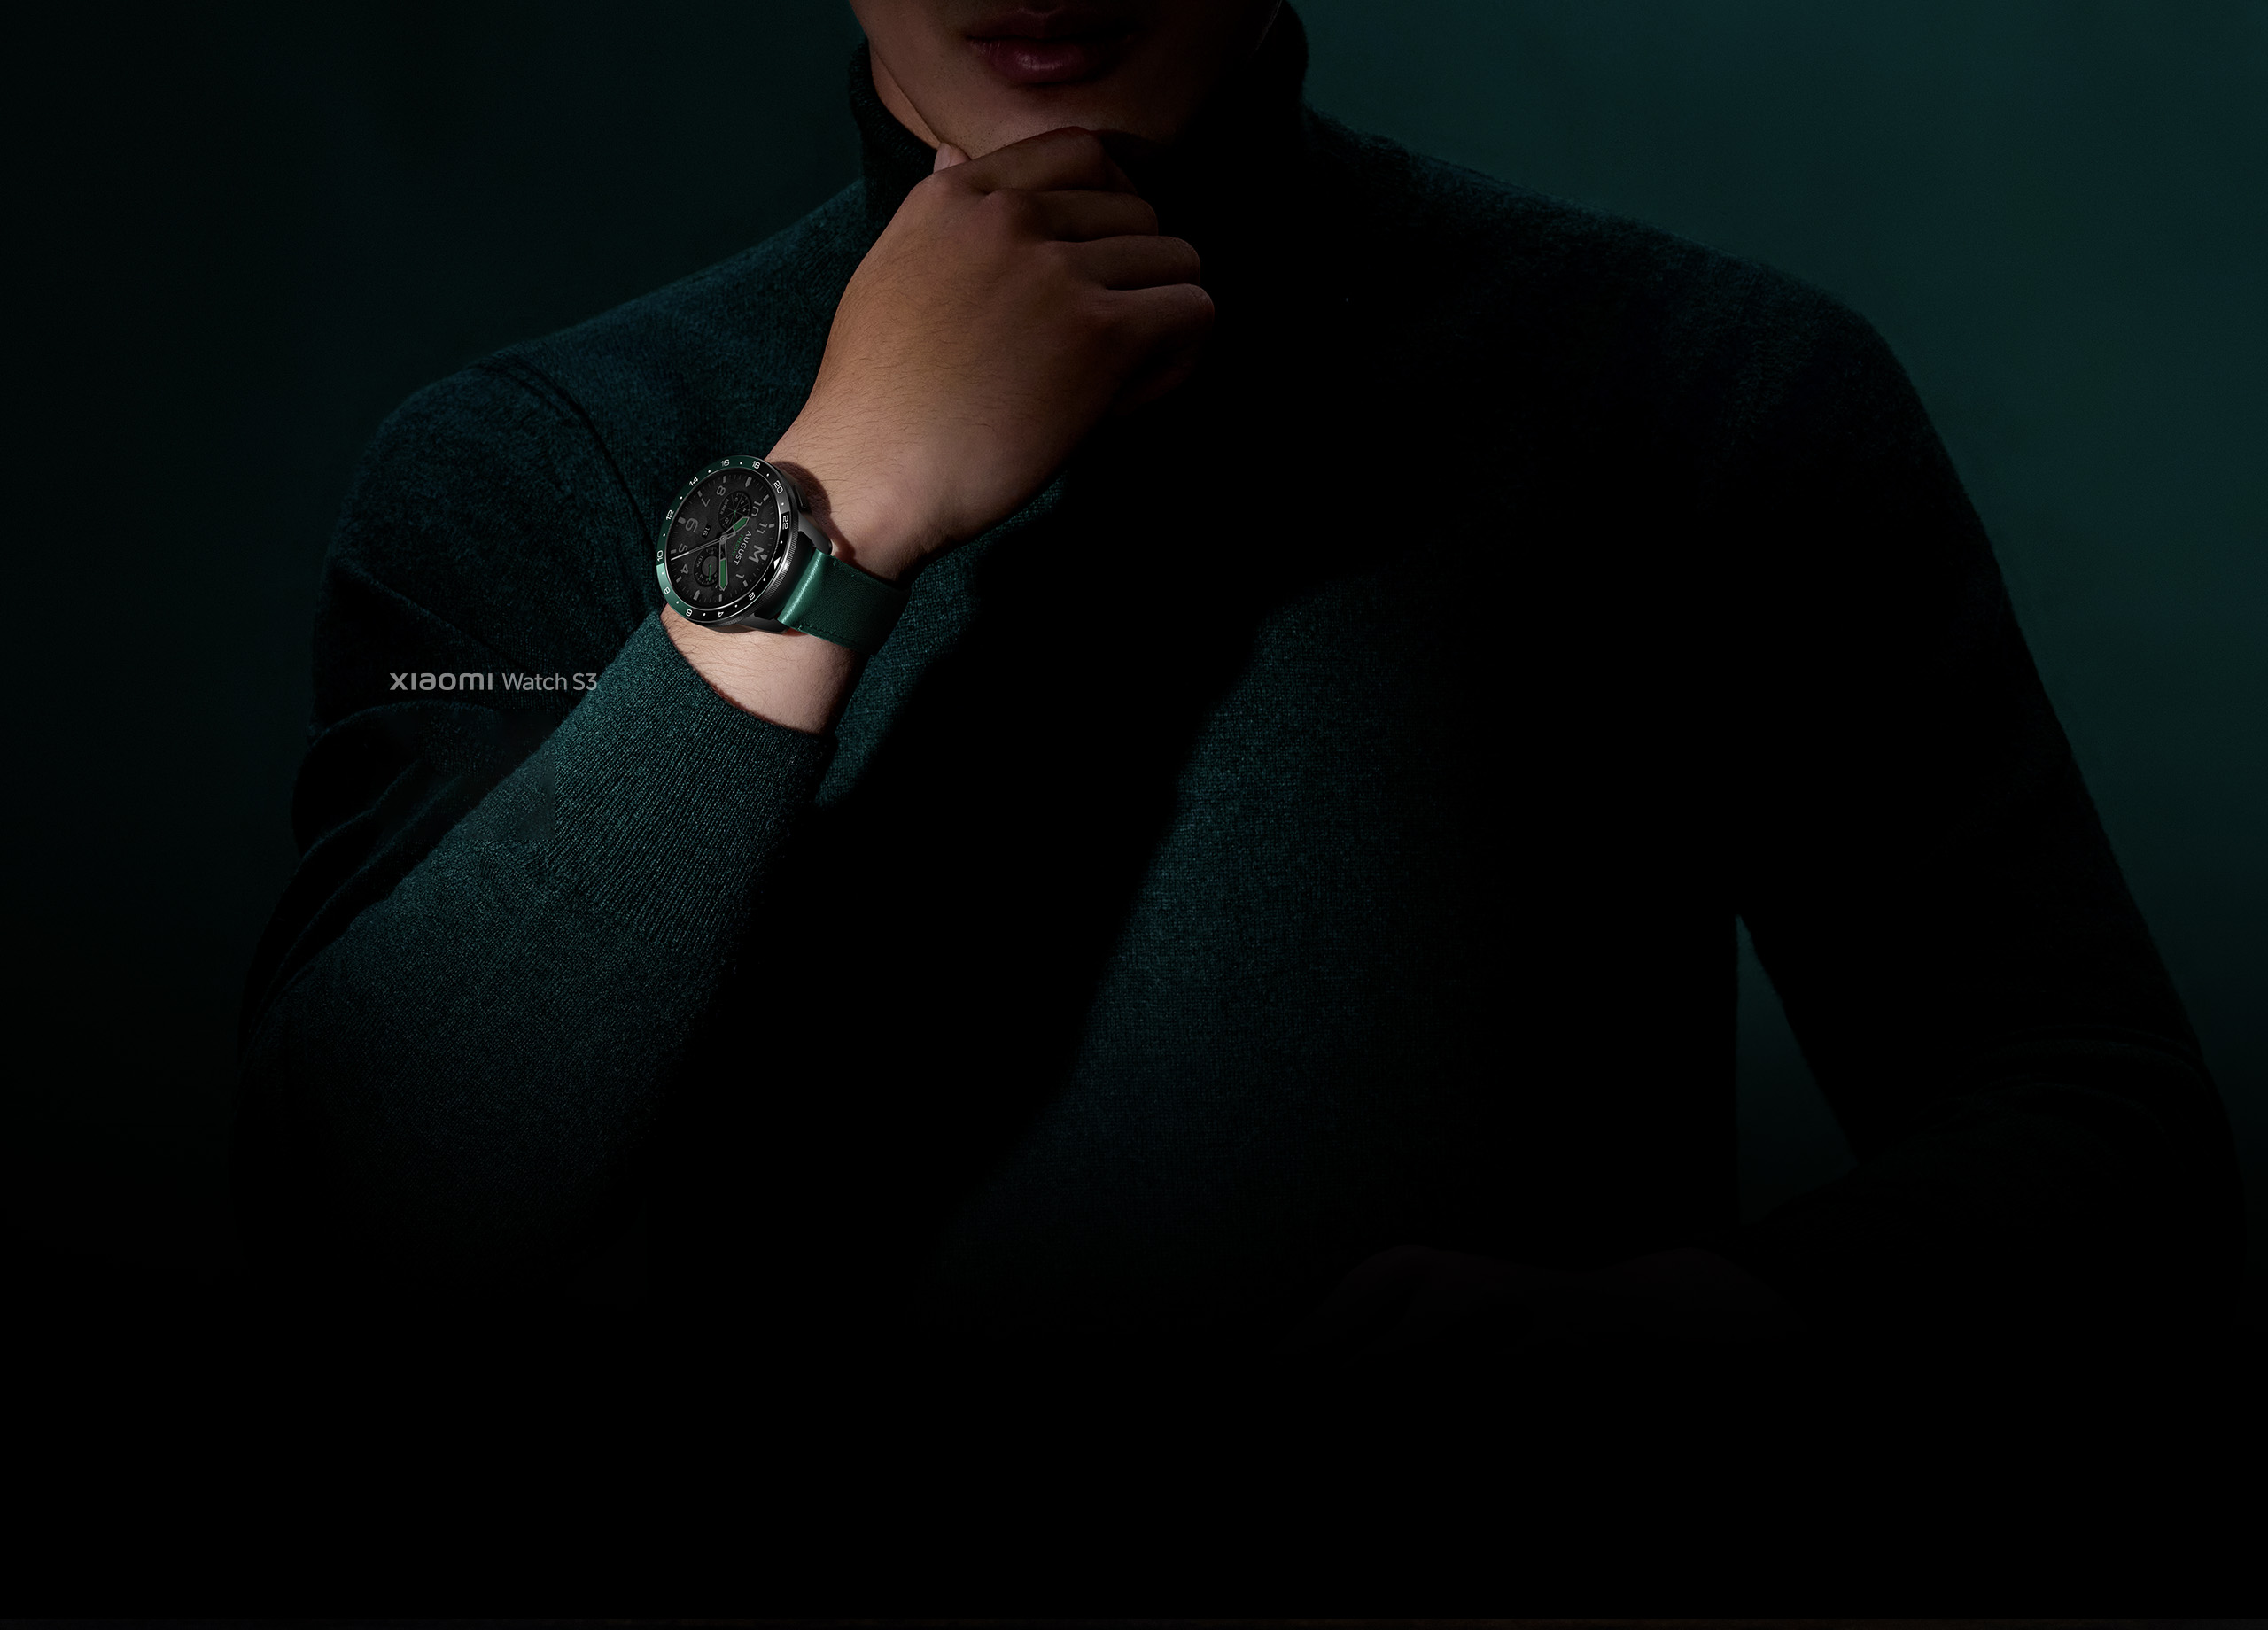 Xiaomi Watch S3 has an ingenious design feature that other smartwatches  can't beat